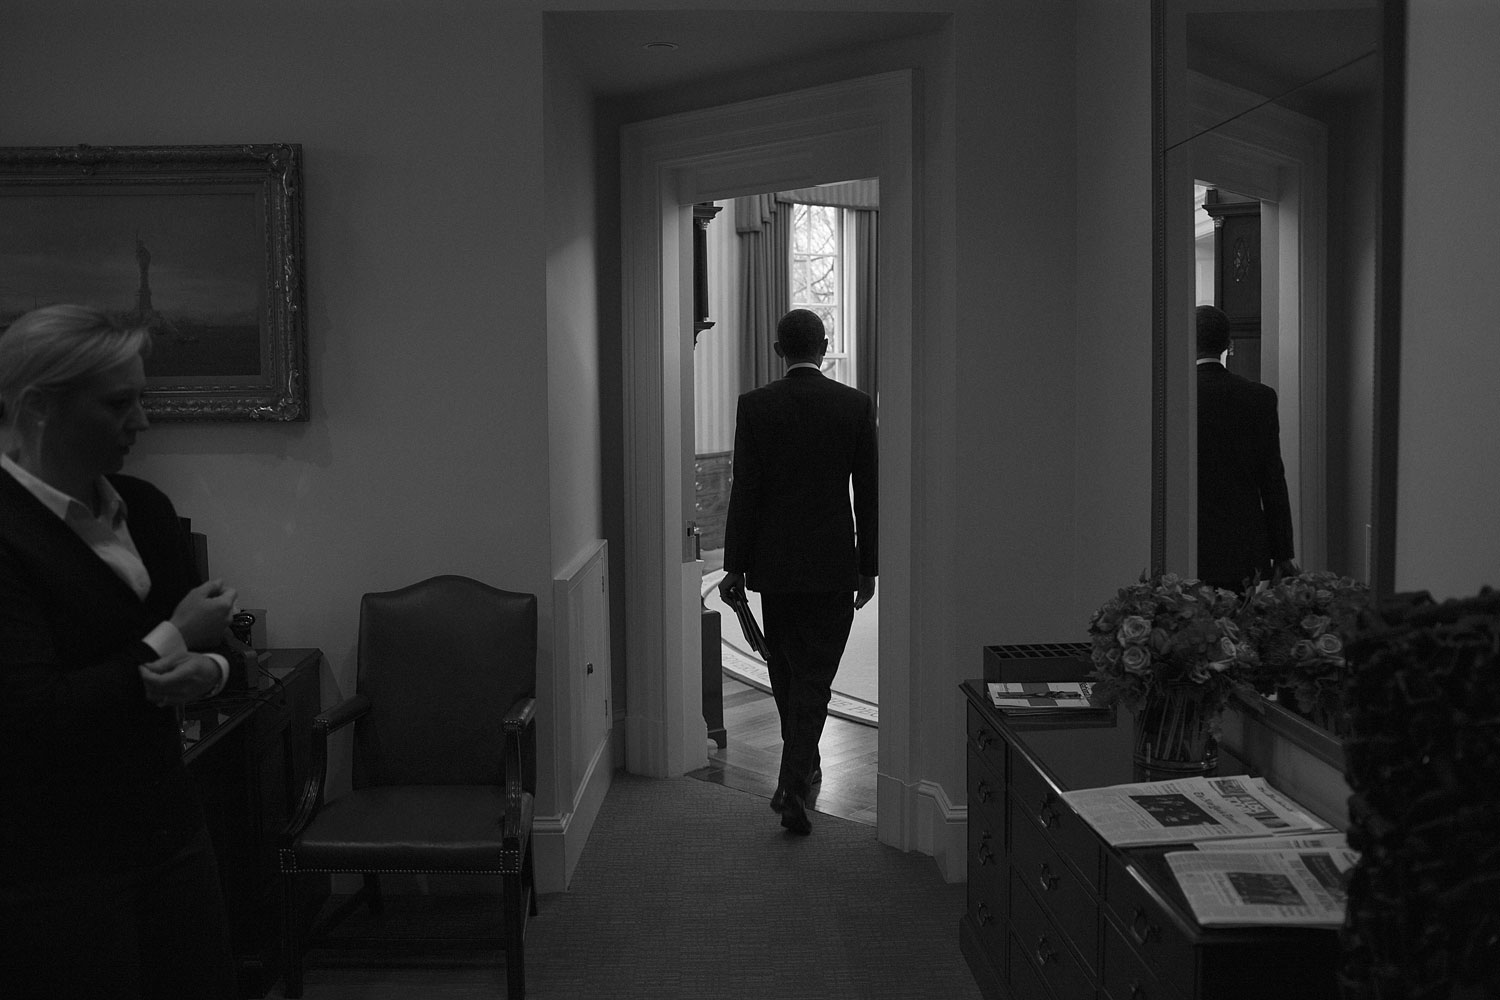 January 17, 2012. The President enters the Oval Office while his secretary stands at the far left.